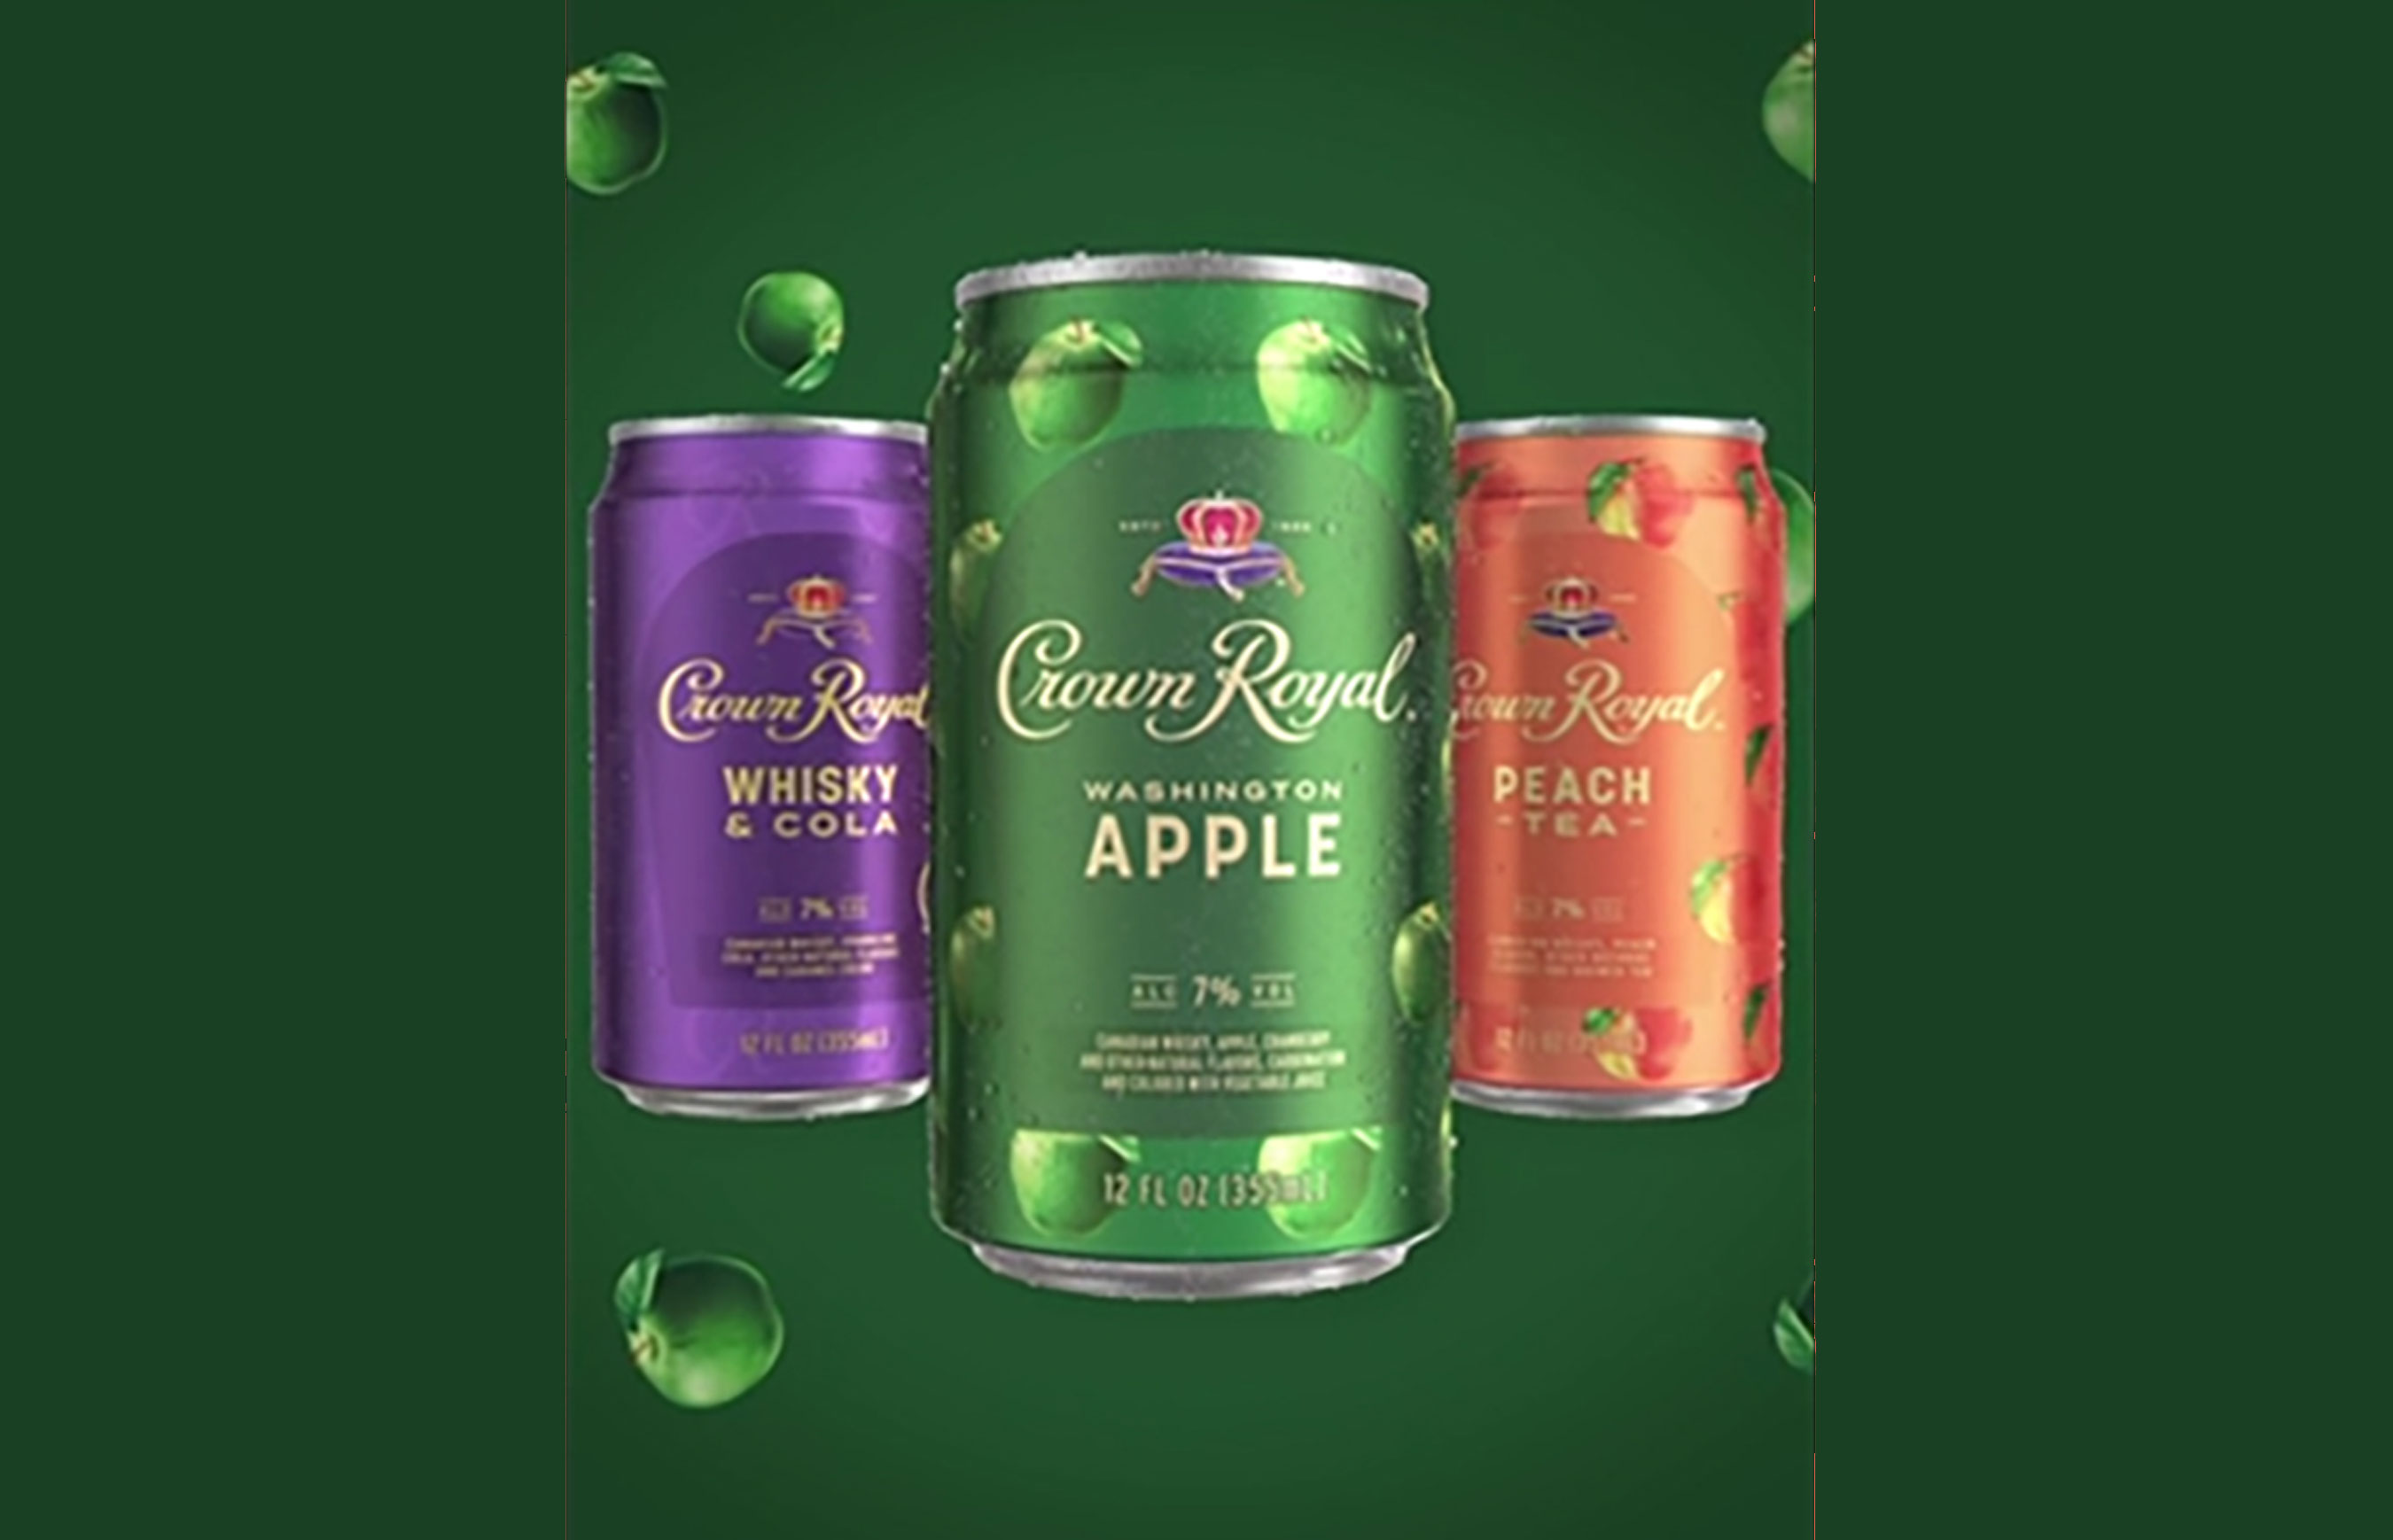 Washington Apple featuring Crown Royal whisky, apple and sparkling cranberry flavors